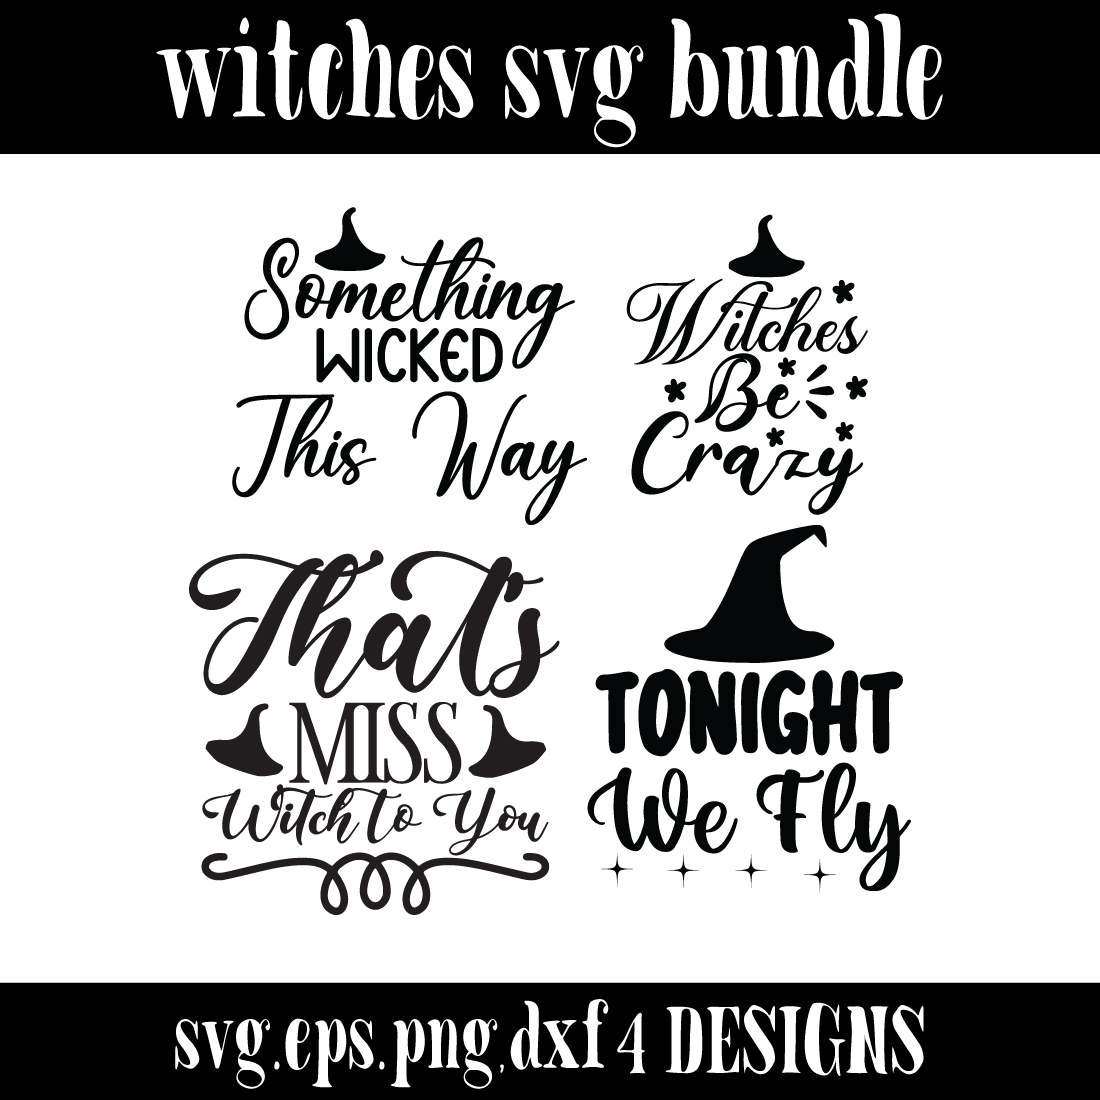 witches SVG bundle cover image.